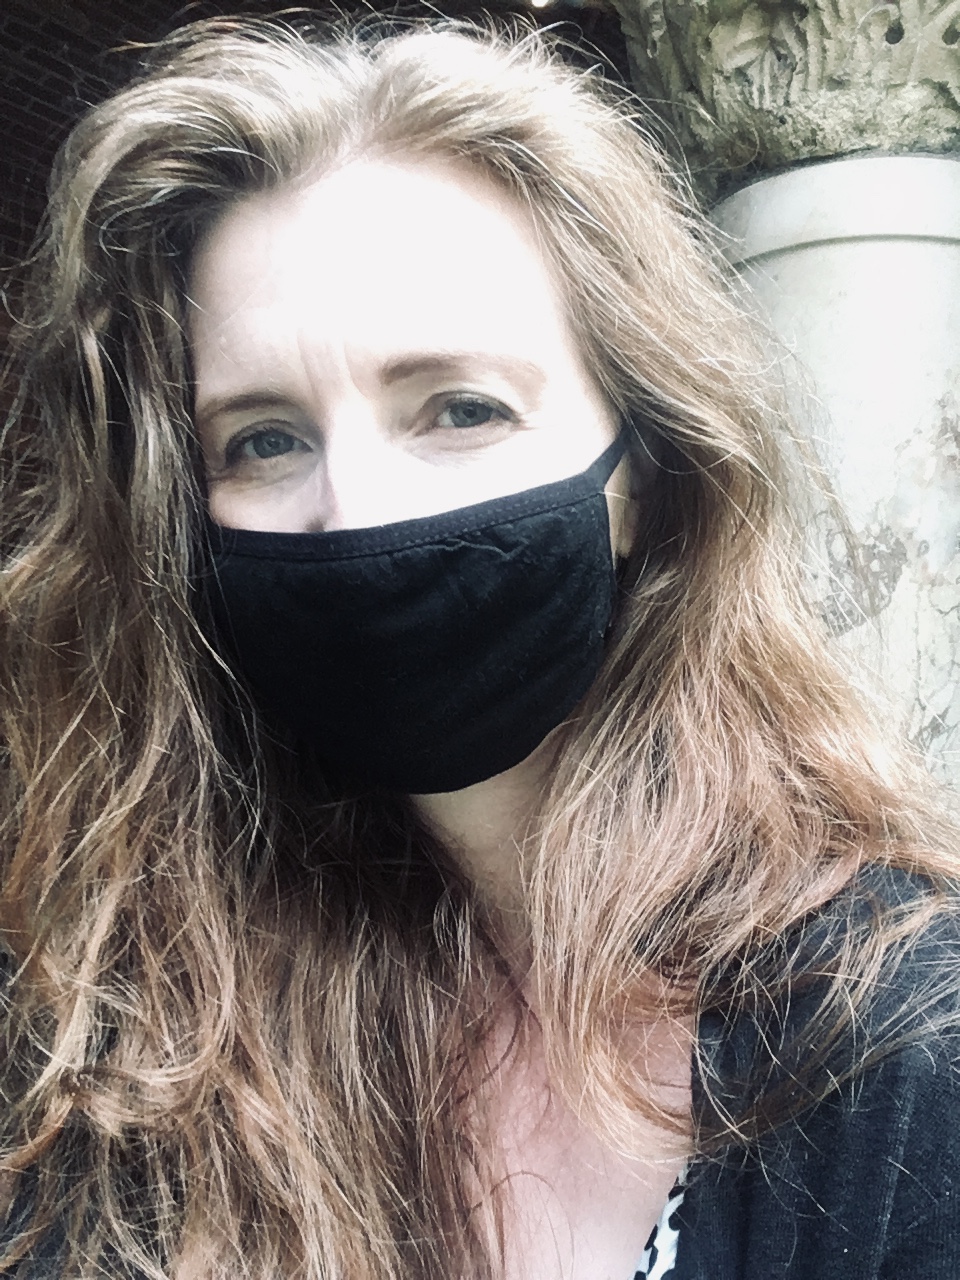 Portrait of Aurelie wearing a mask during the pandemic